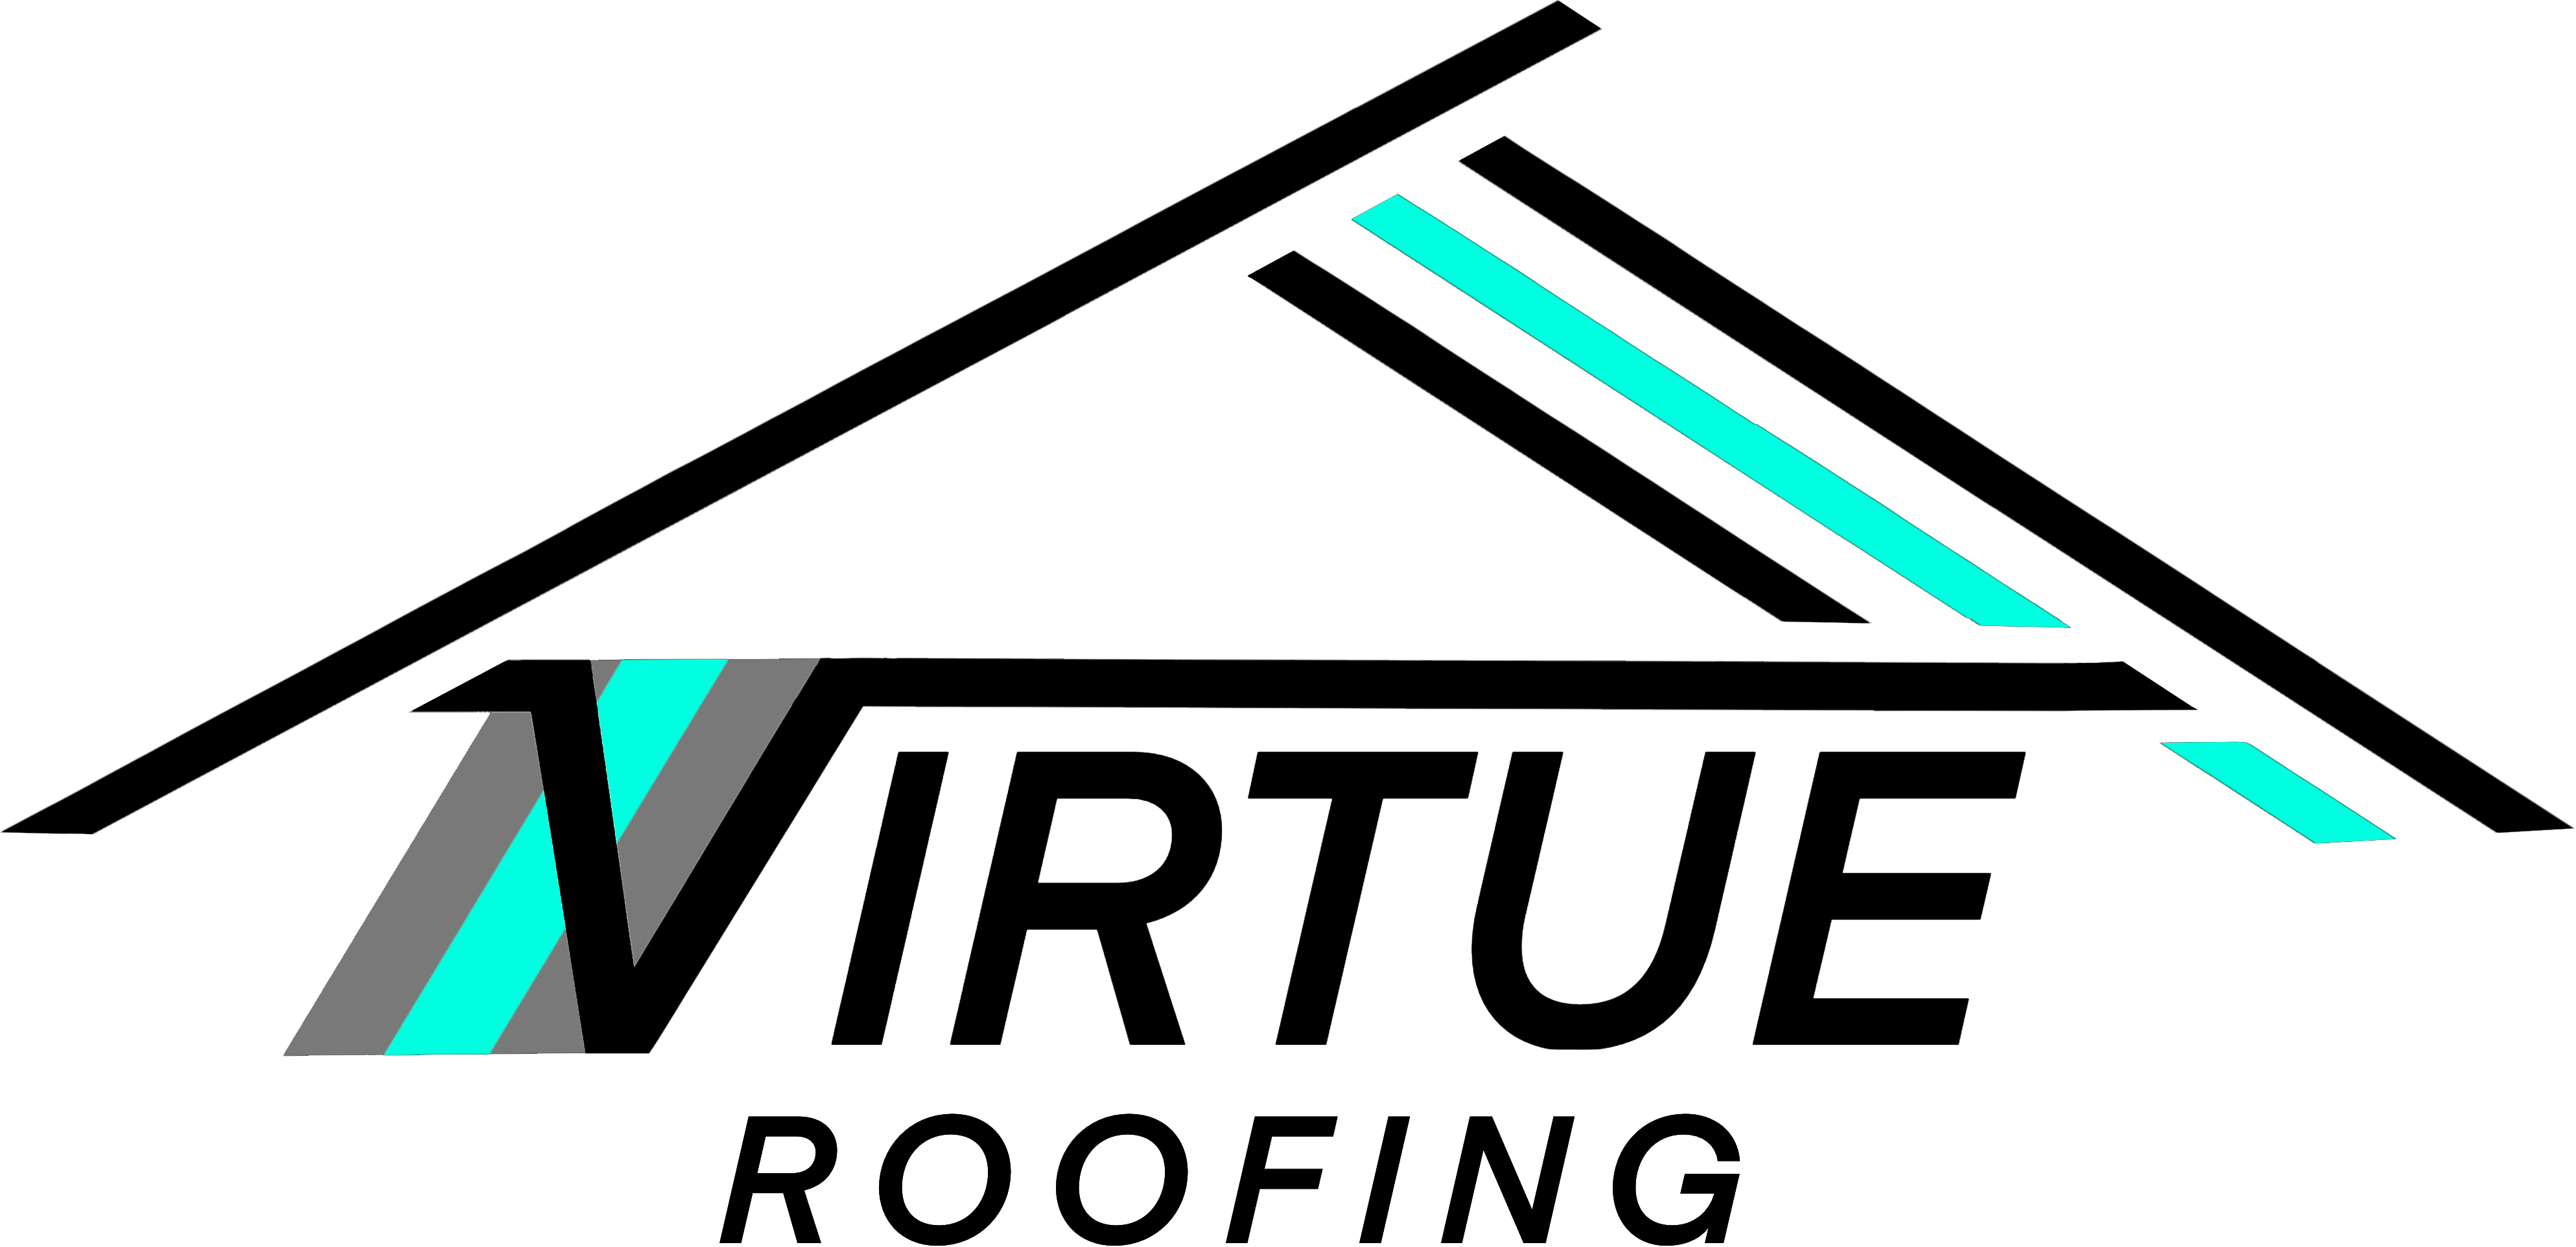 VIRTUE ROOFING